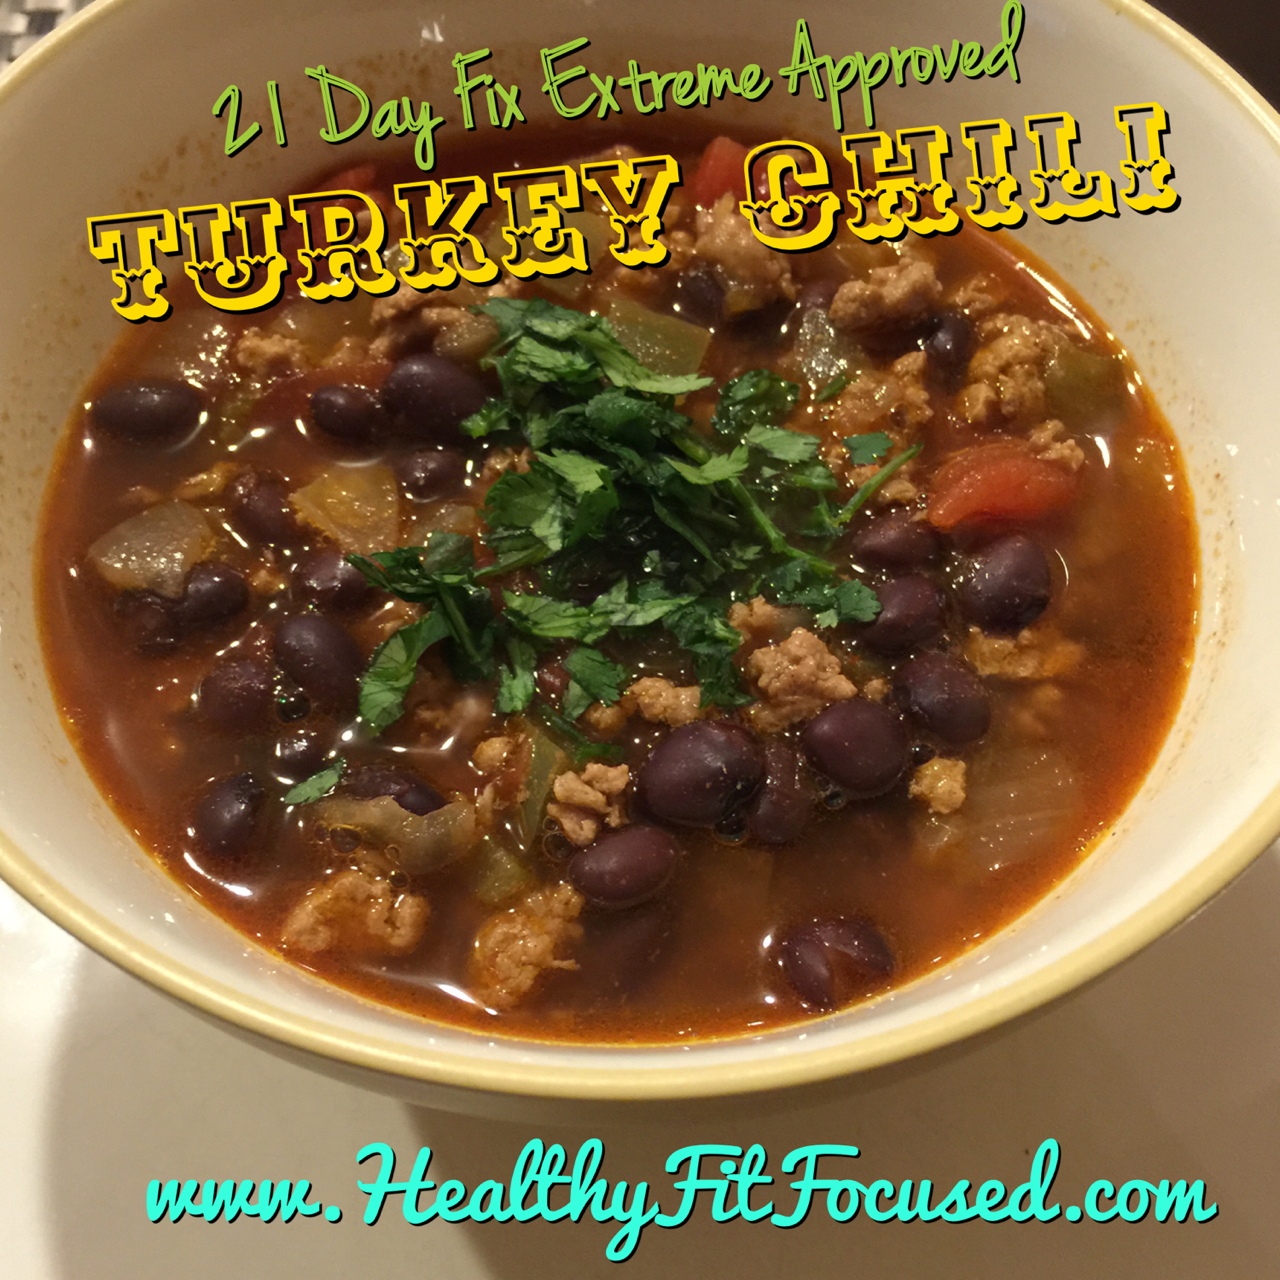 21 Day Fix Extreme approved recipe, 21 day fix recipe, turkey chili, www.HealthyFitFocused.com, Julie Little